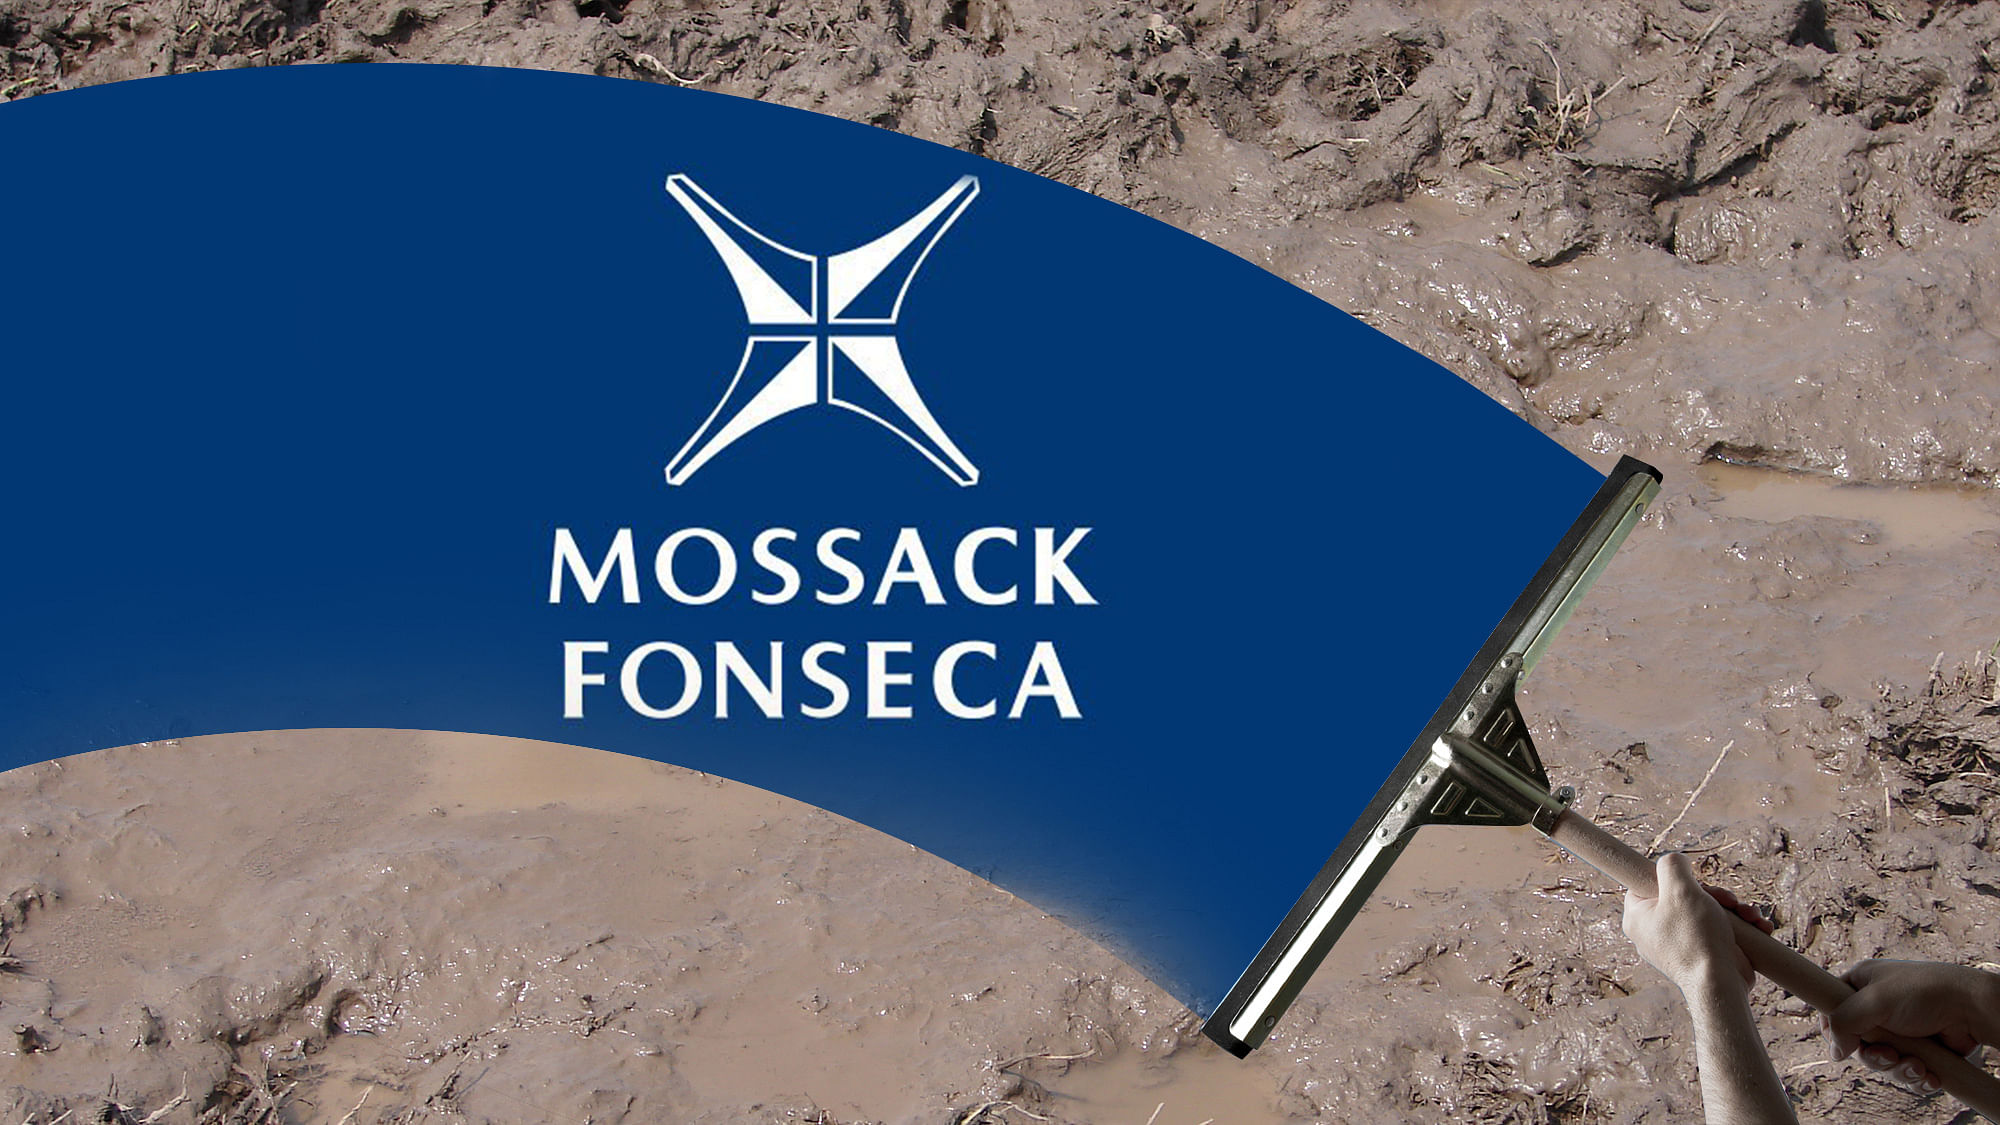 Mossack Fonseca, the firm named in the Panama paper leaks, has denied association with most of the names mentioned in the papers. (Photo: <b>The Quint</b>)